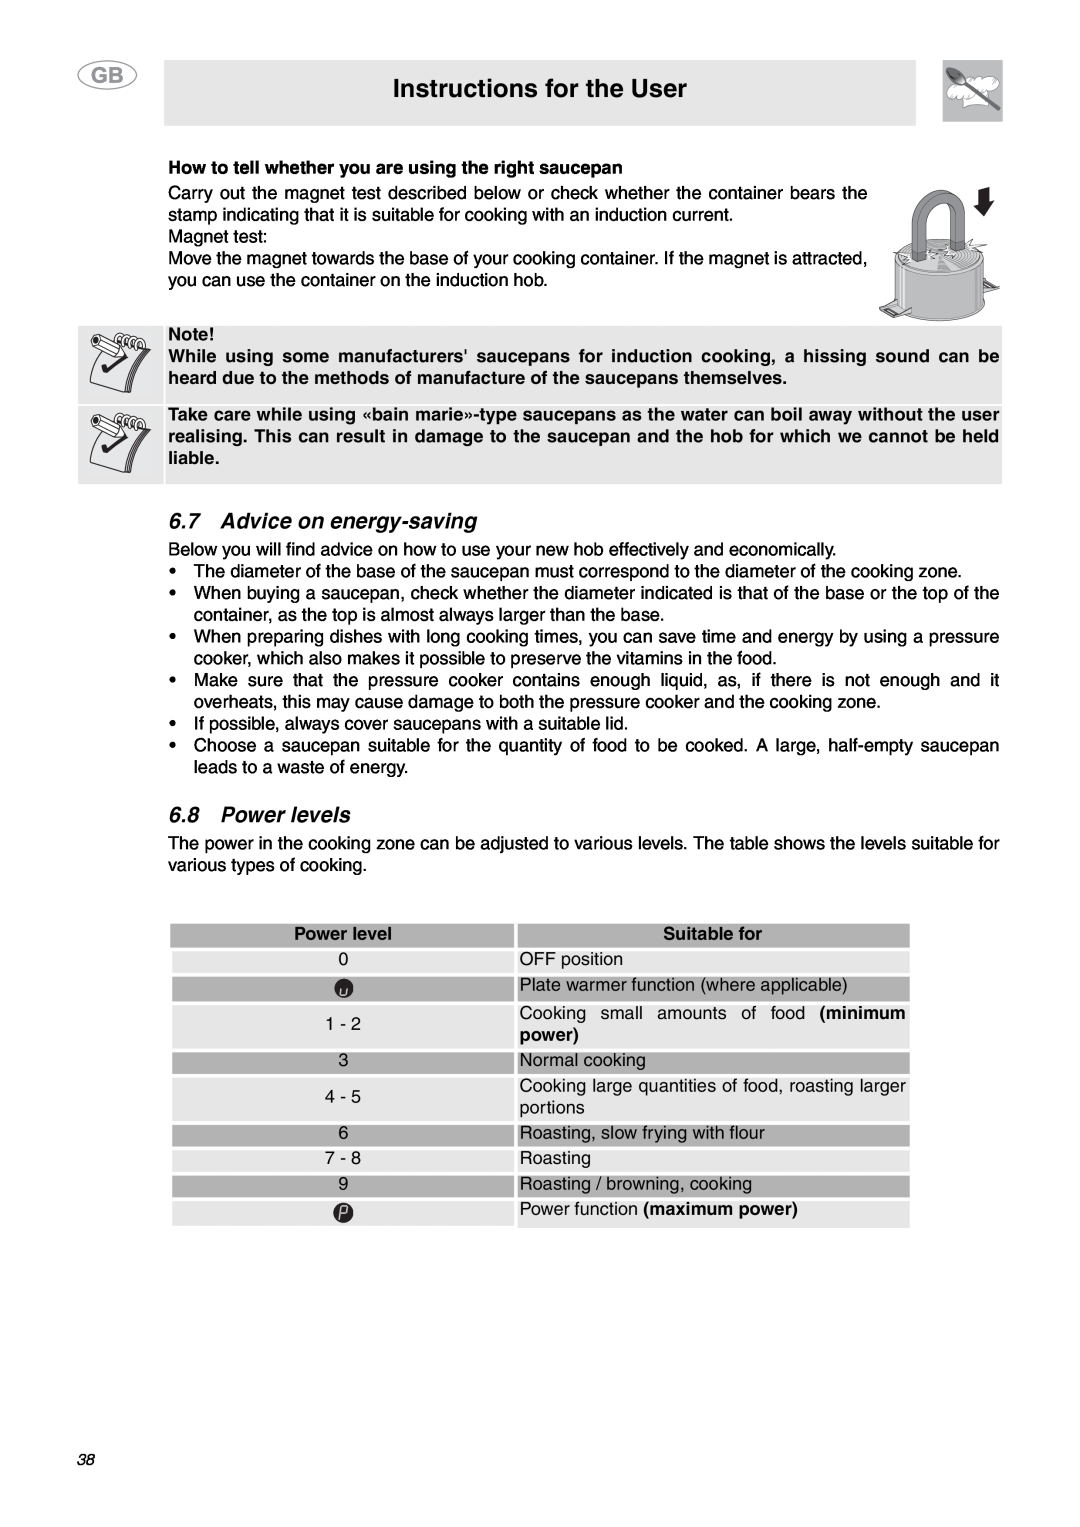 Smeg SE2642ID3 manual Advice on energy-saving, Power levels, Instructions for the User, Suitable for, power 